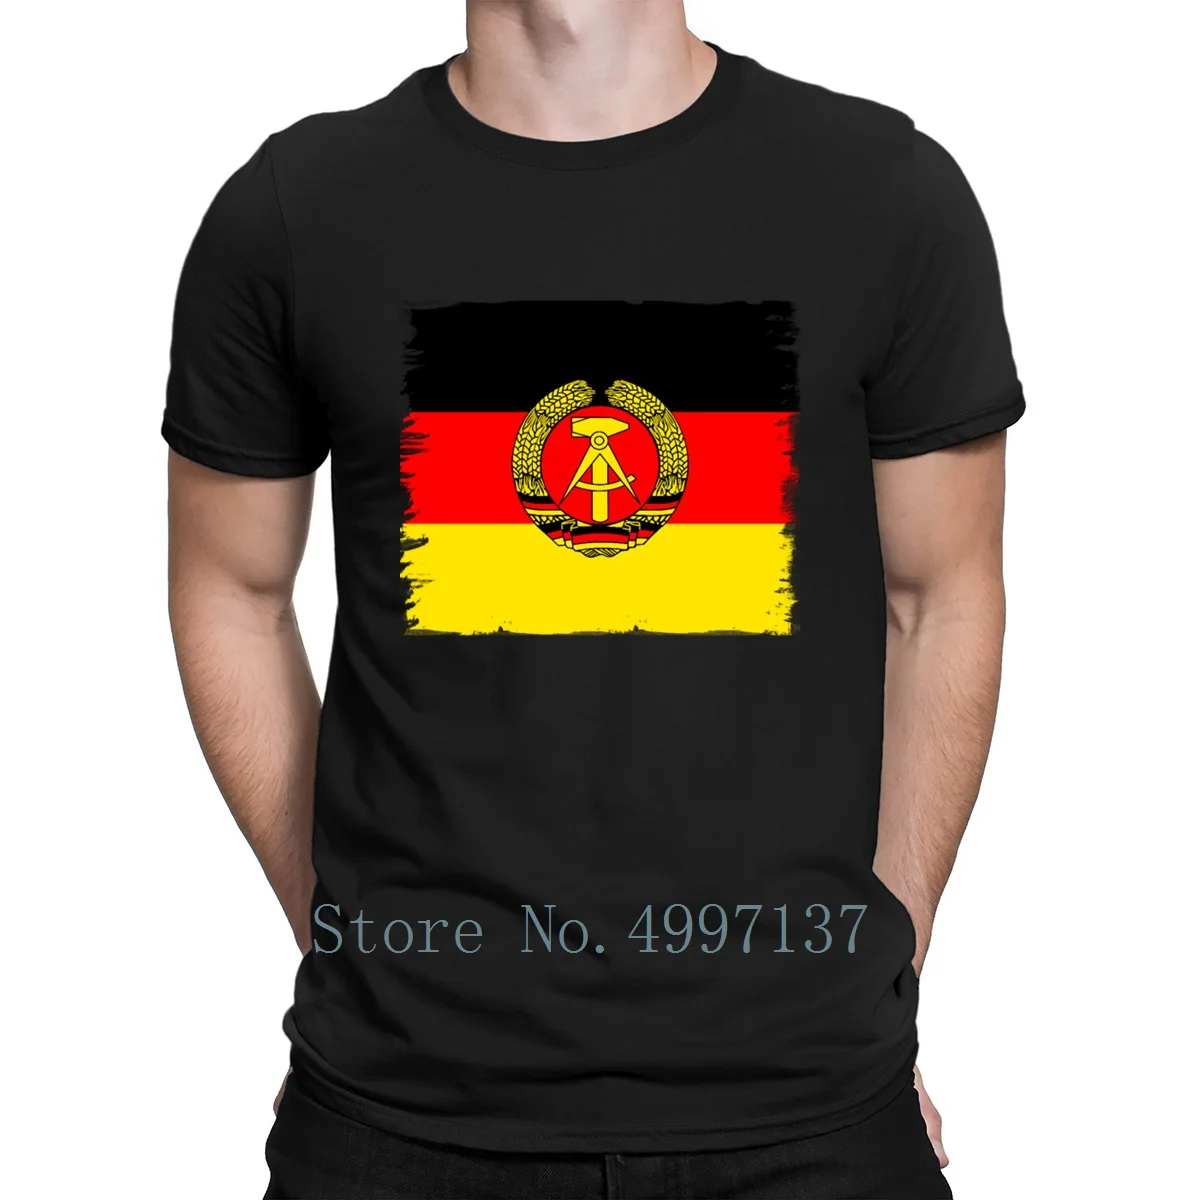 

Ddr Germany East Gdr Flag Retro Wall Emblem T Shirt Normal Customize Humor 100% Cotton Spring Autumn S-3xl Crazy Leisure Shirt